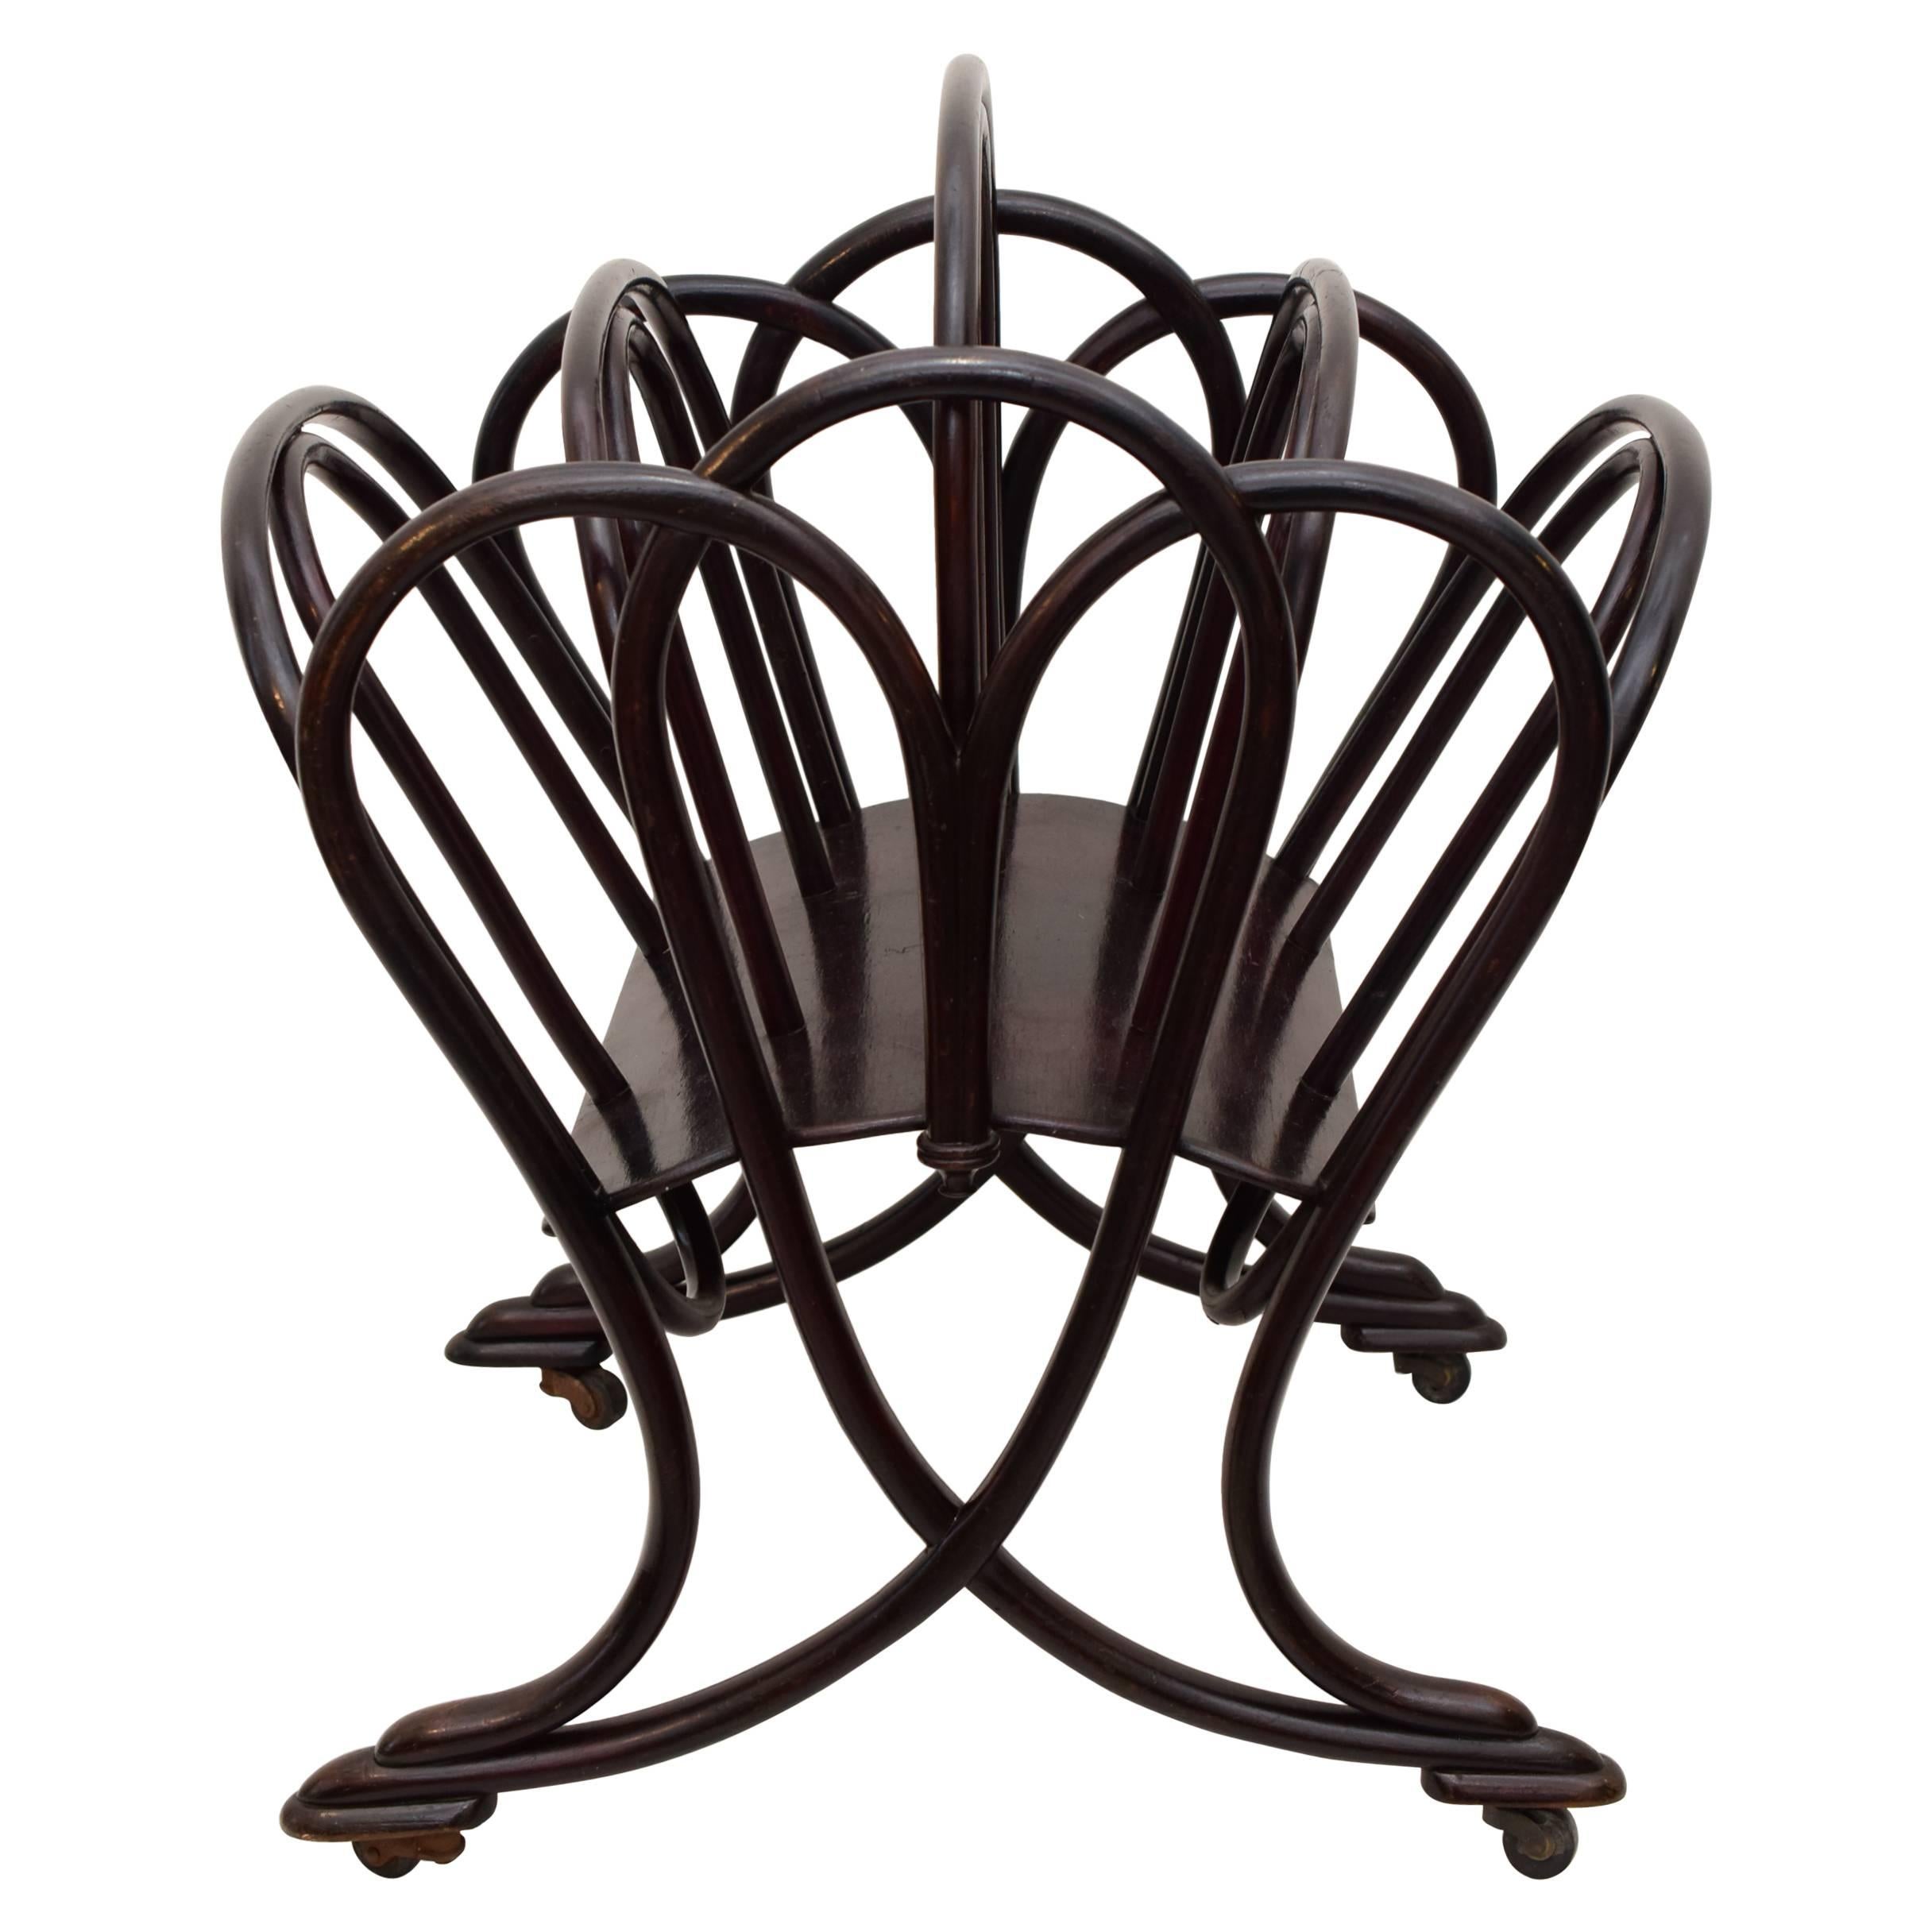 Viennese Thonet Bentwood Magazine Rack with Moving Wheels